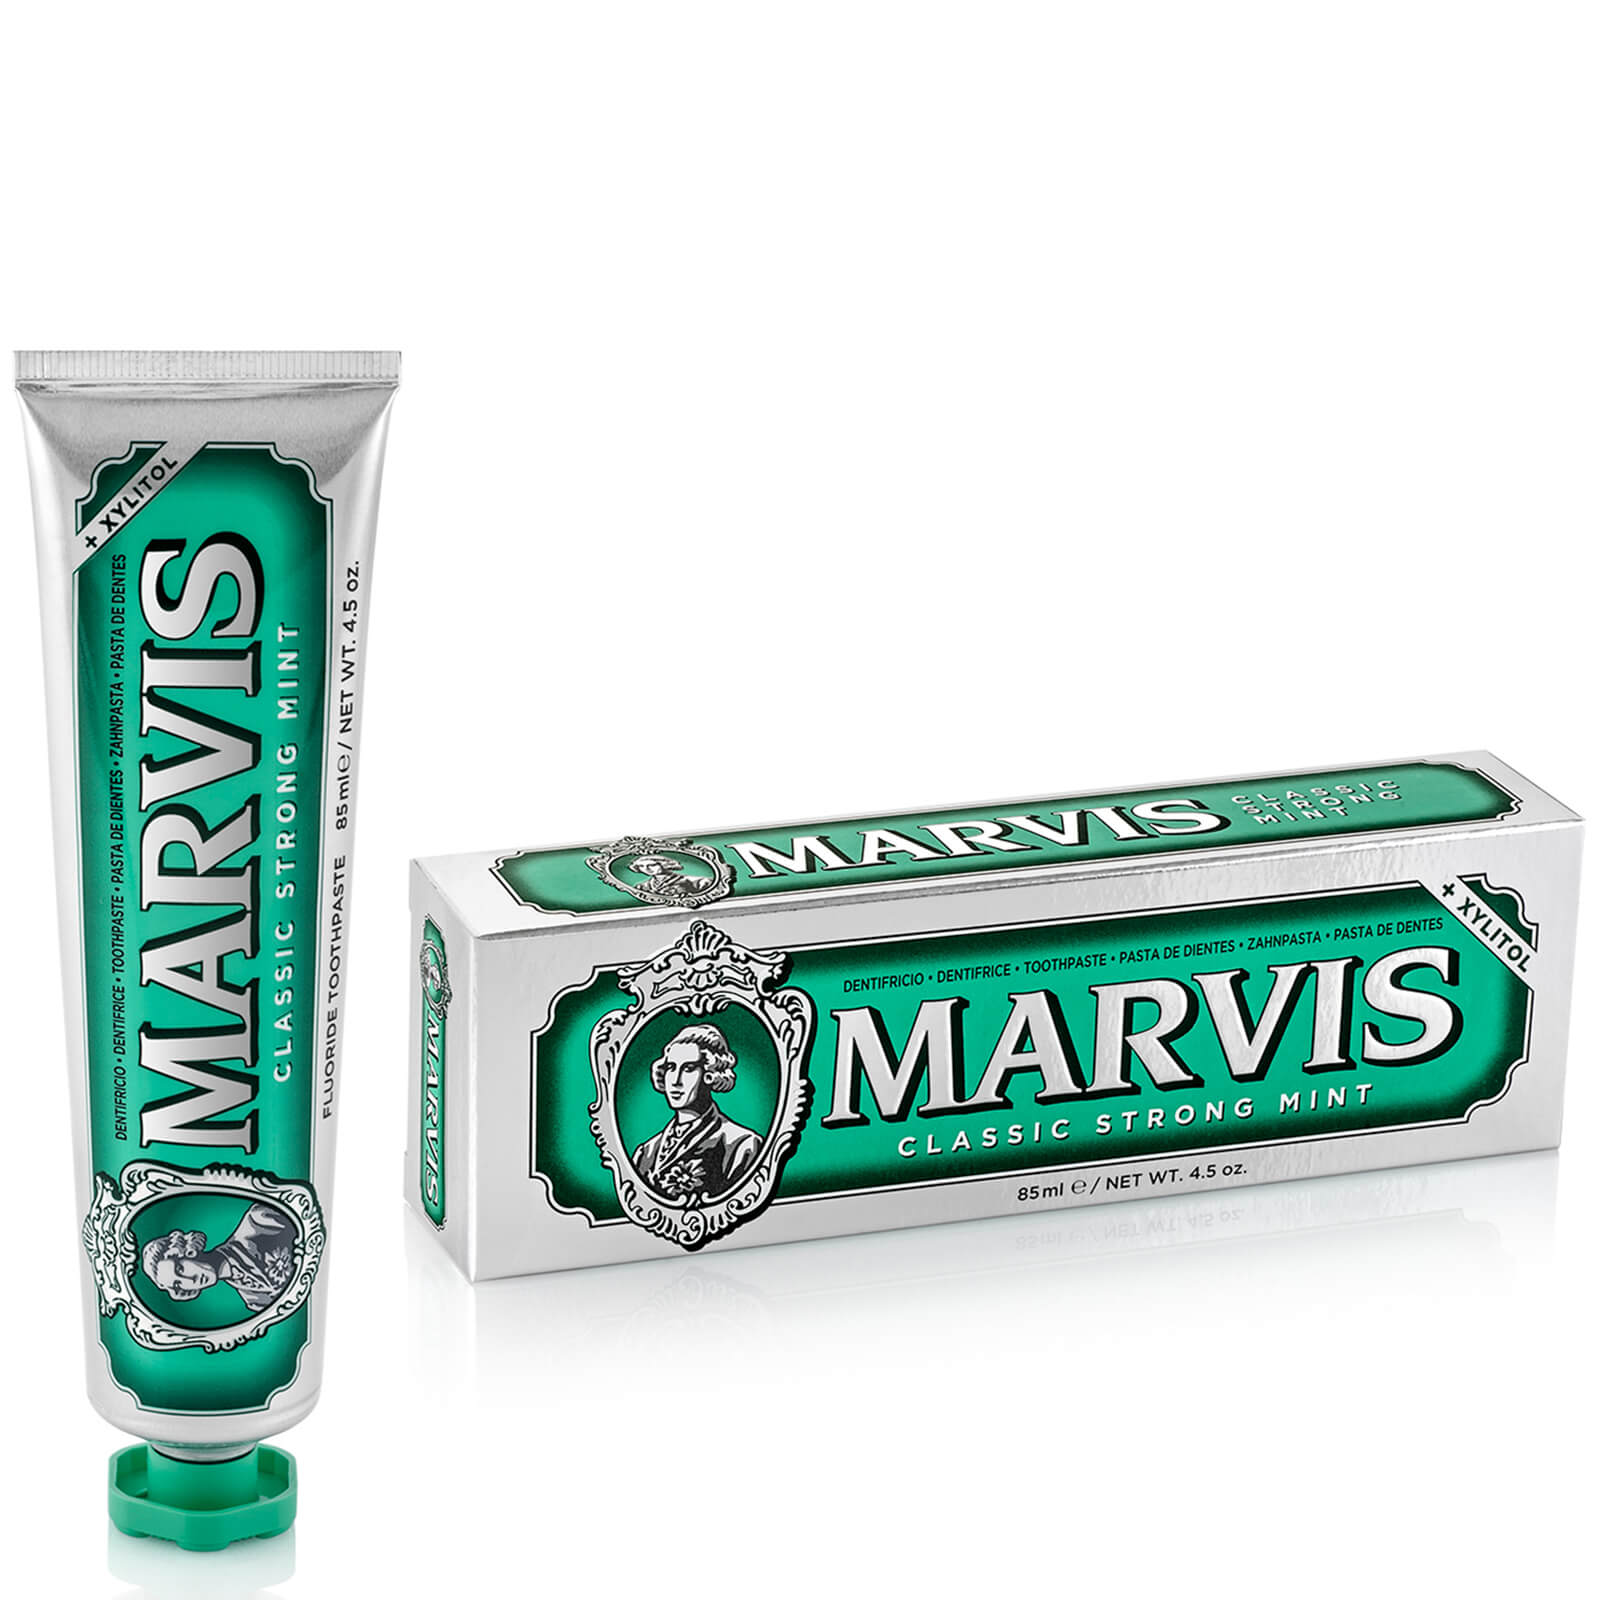 Marvis Classic Strong Mint Toothpaste 85ml lookfantastic.com imagine